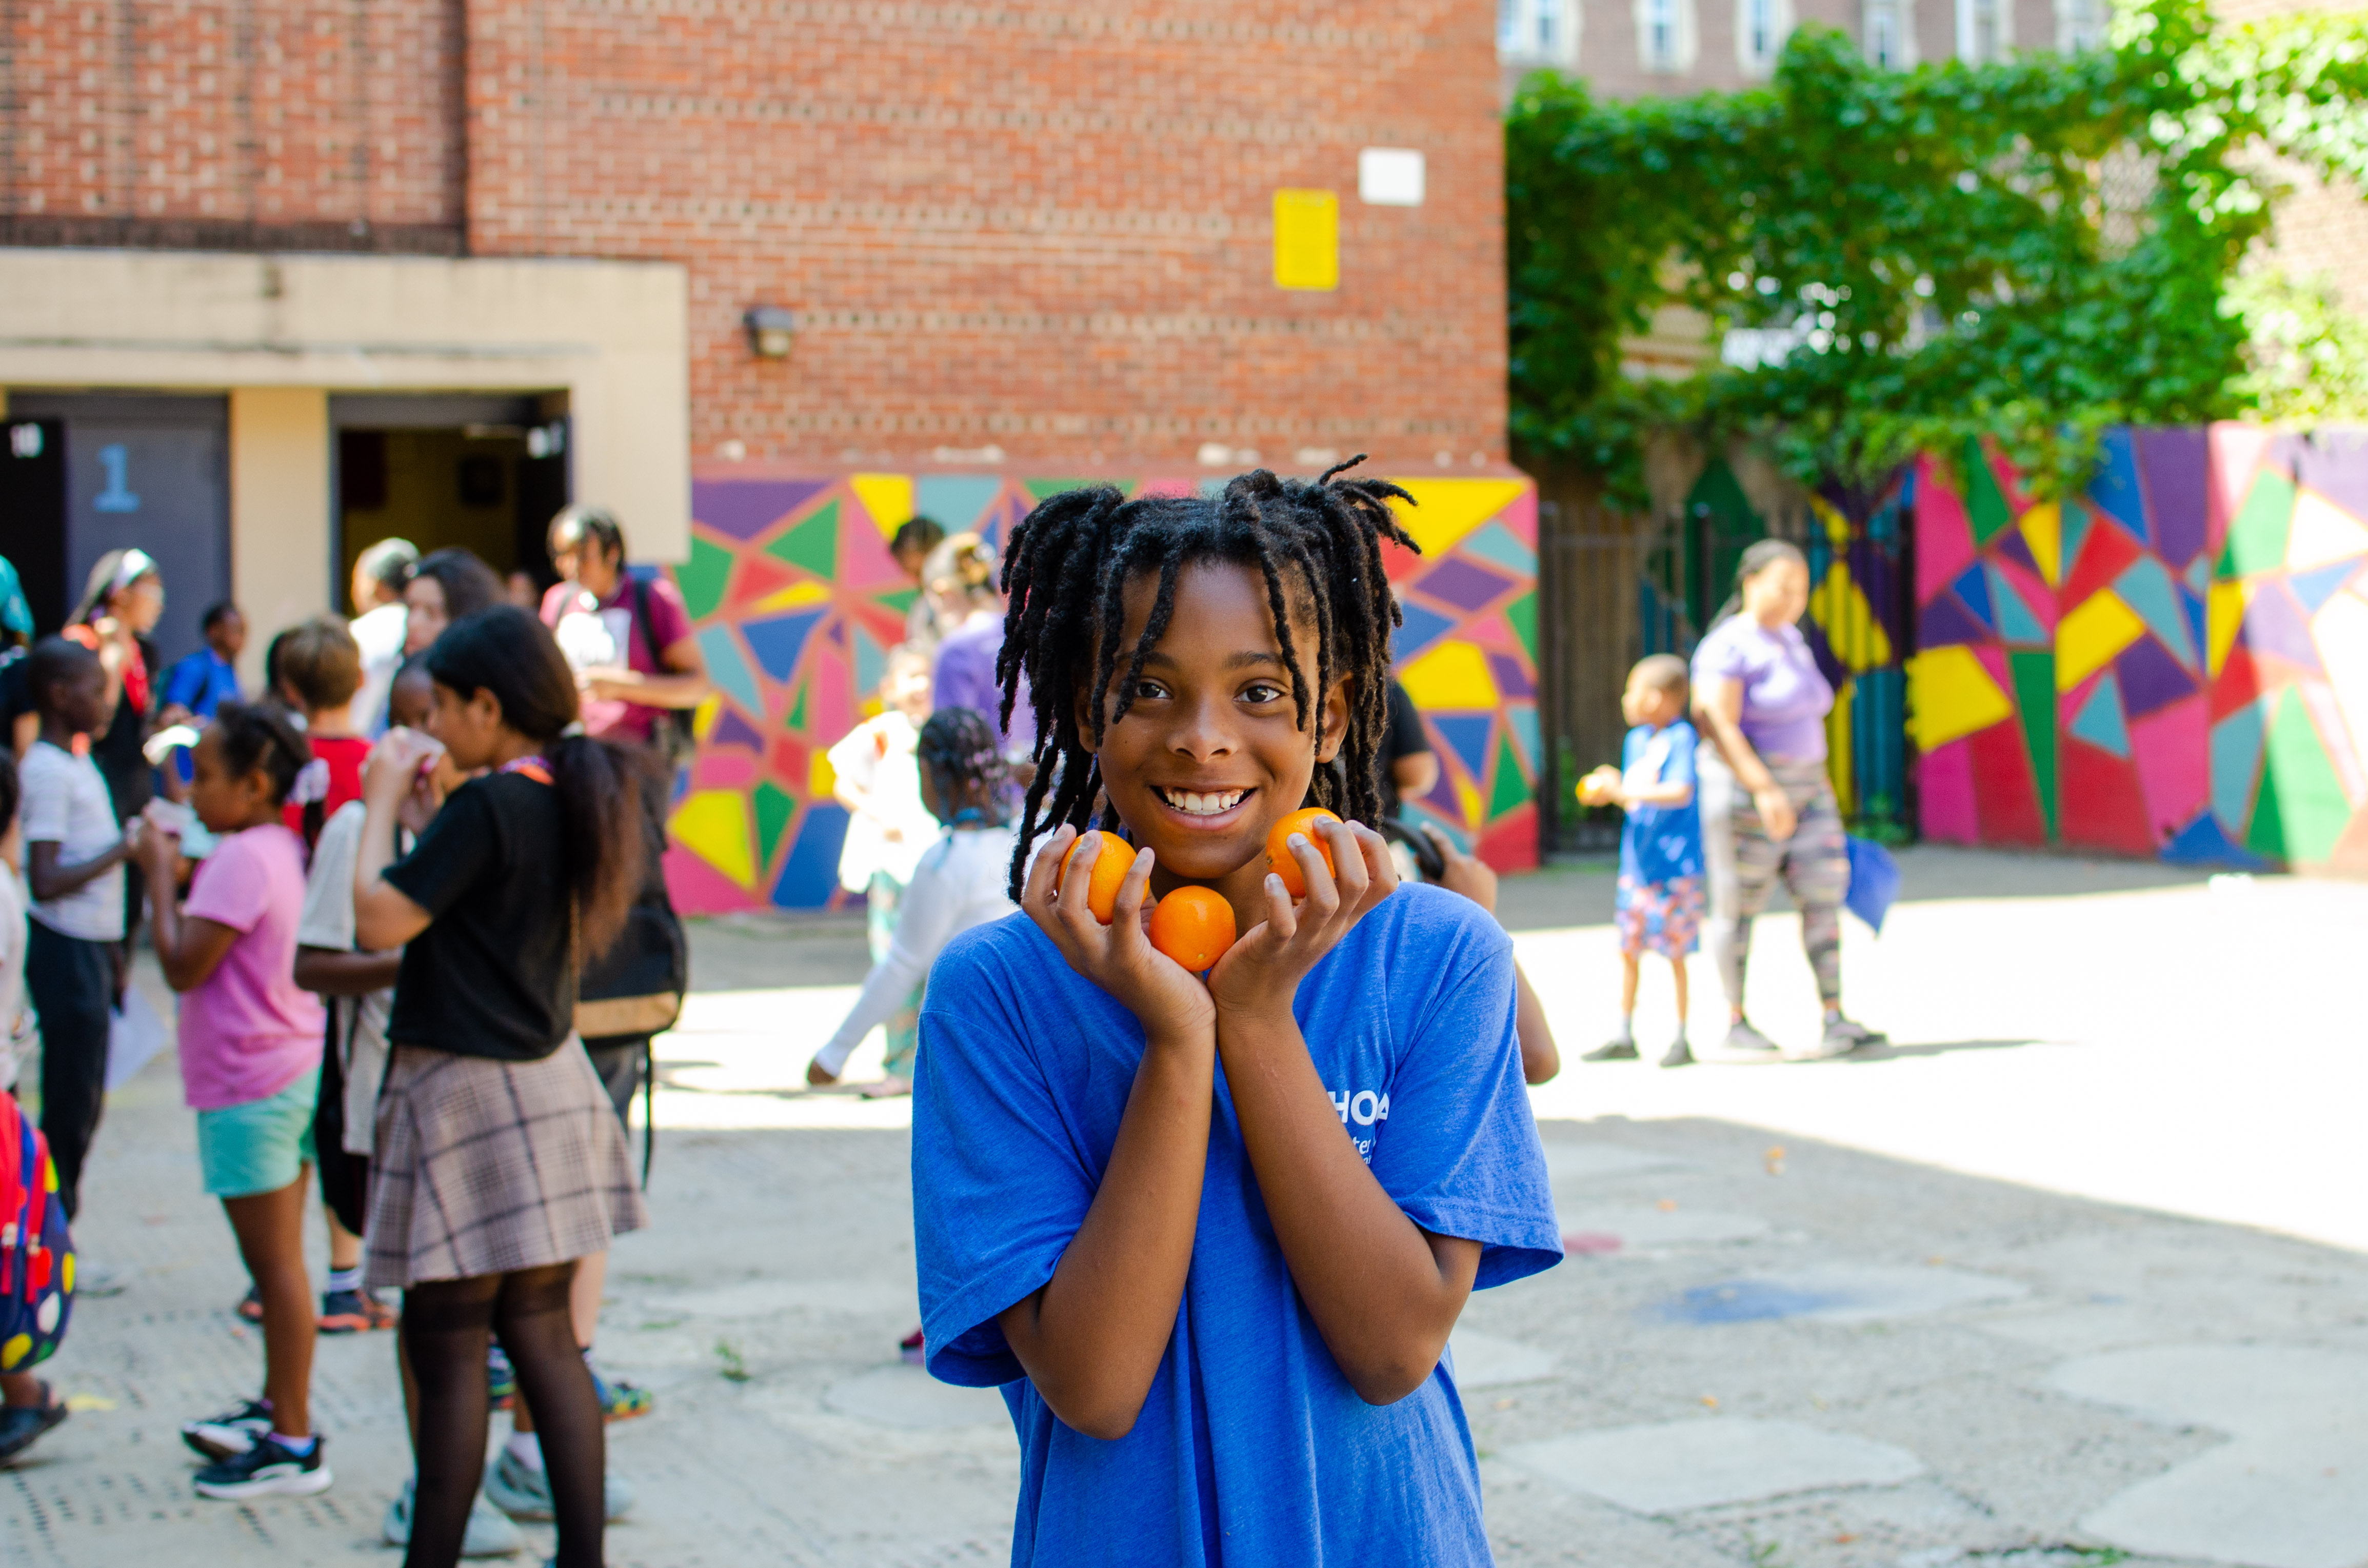 A child at Lea Elementary hold three clementines in her hands